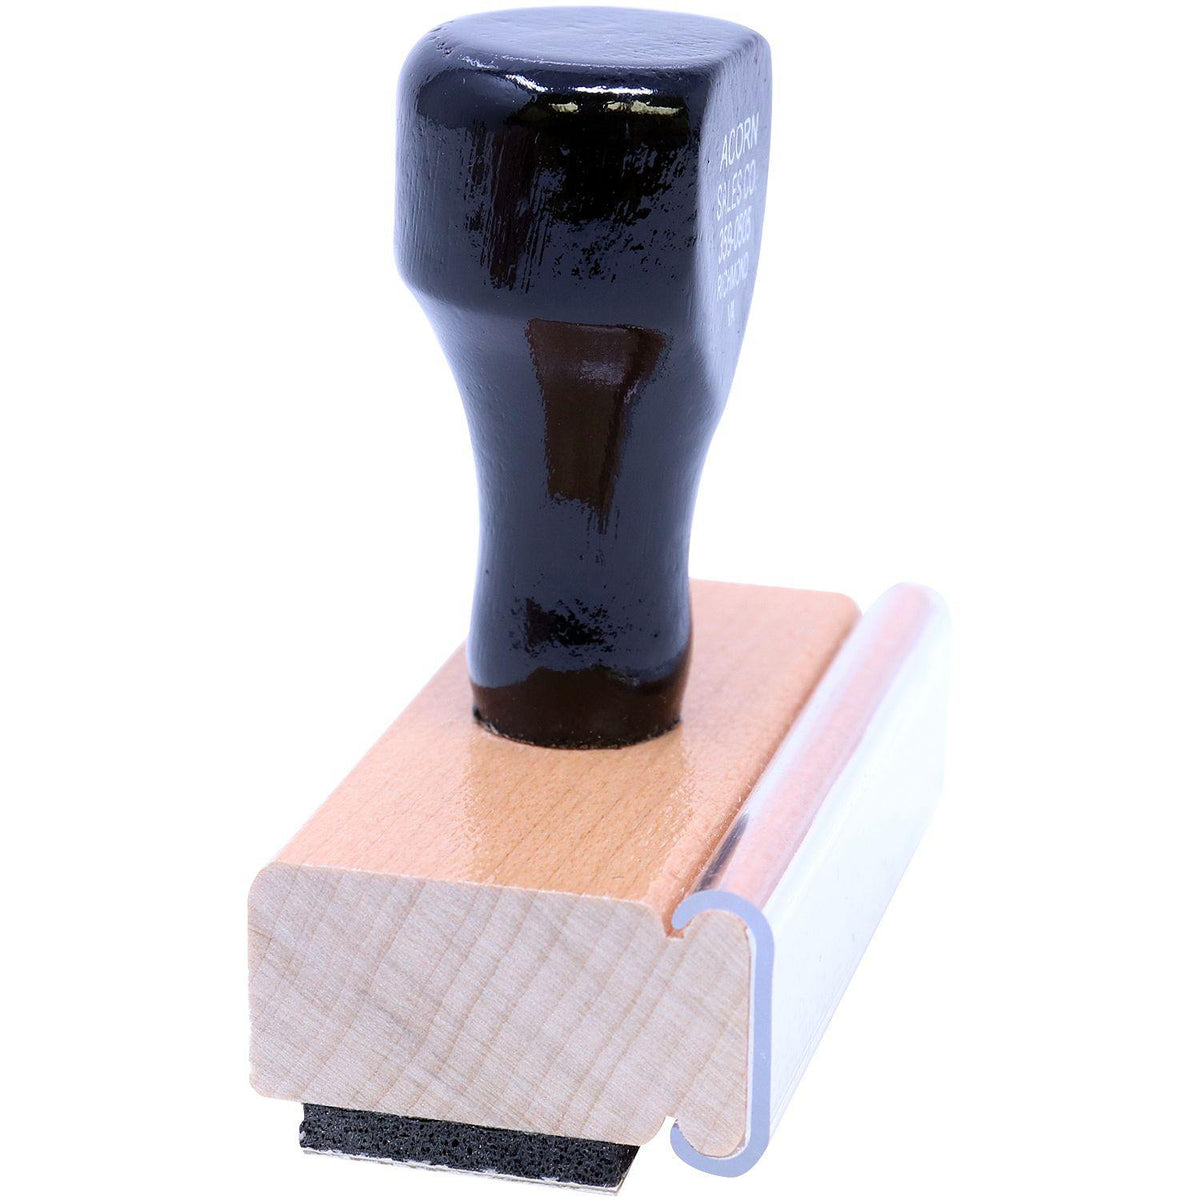 Large Wire Transfer Rubber Stamp - Engineer Seal Stamps - Brand_Acorn, Impression Size_Large, Stamp Type_Regular Stamp, Type of Use_Finance